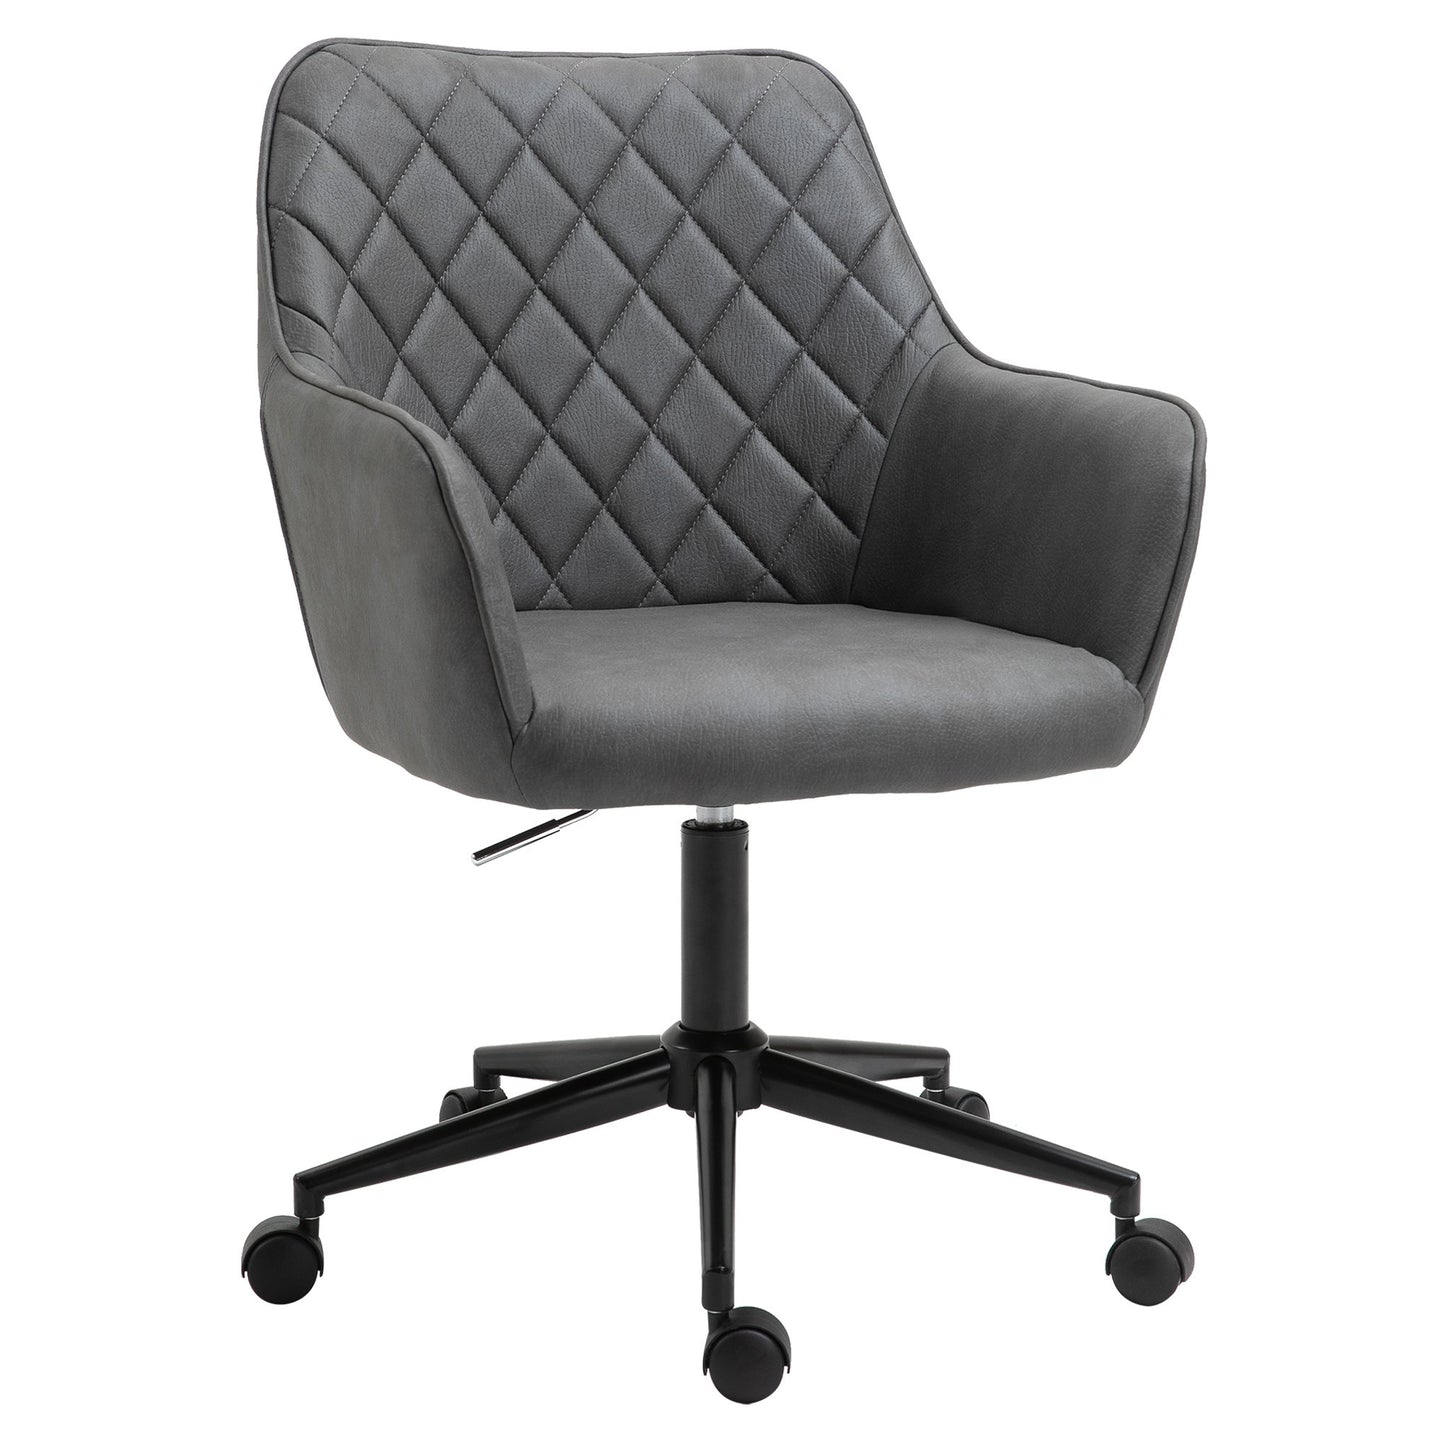 Vinsetto Swivel Argyle Office Chair Leather-Feel Fabric Home Study Leisure with Wheels